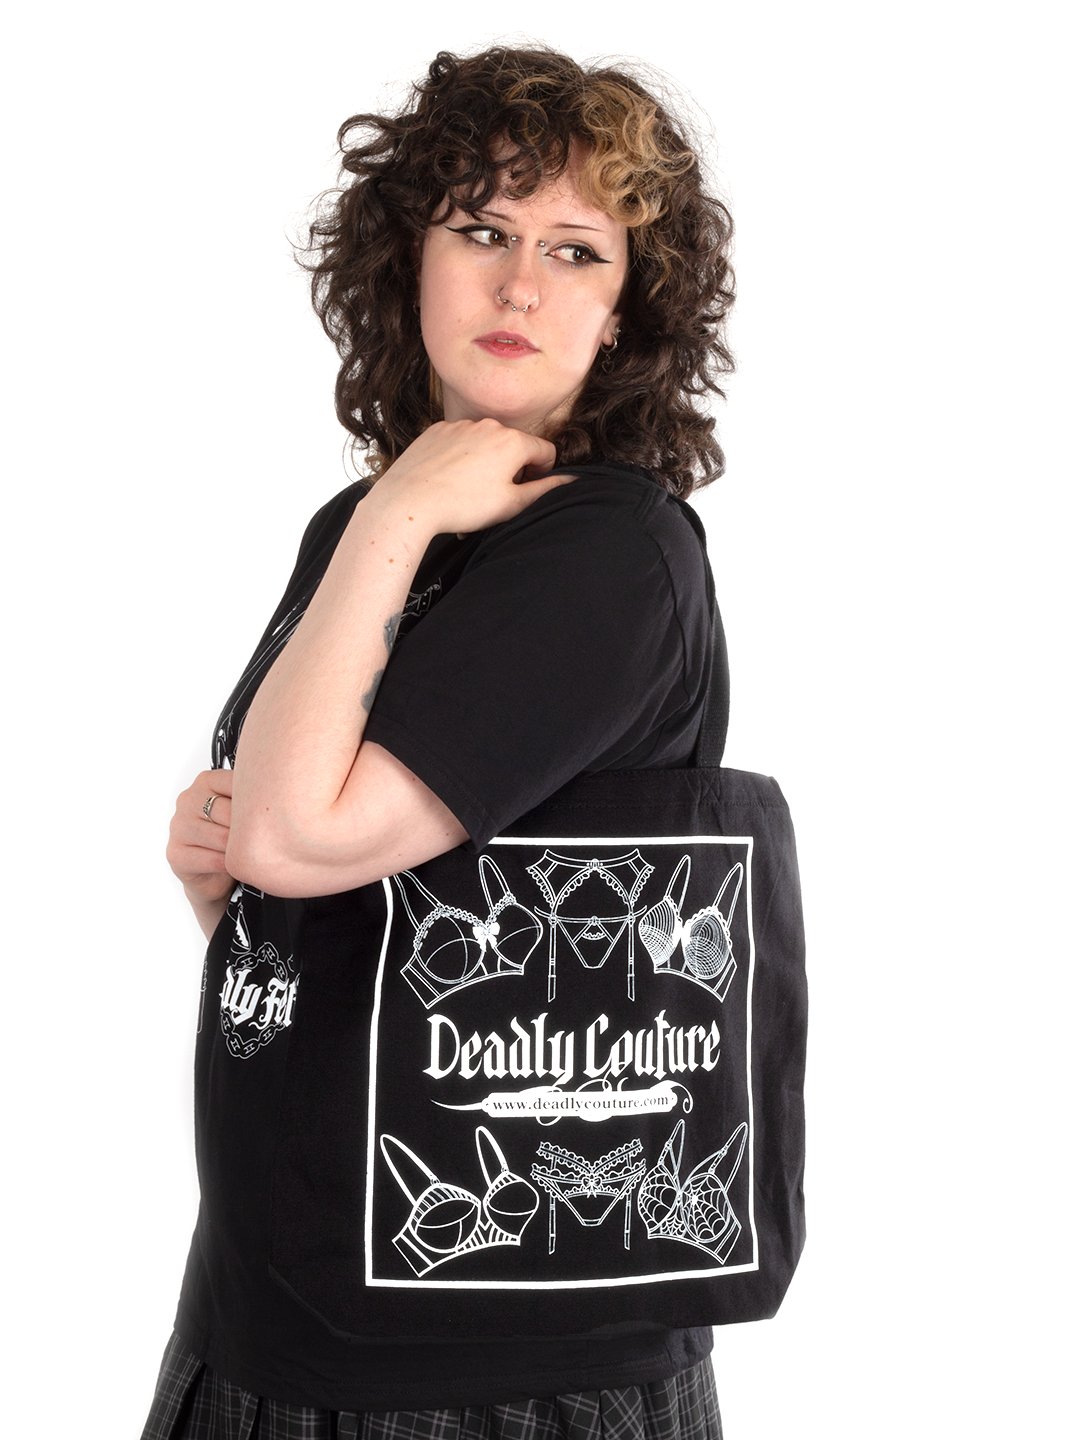 Deadly Couture Lingerie Tote